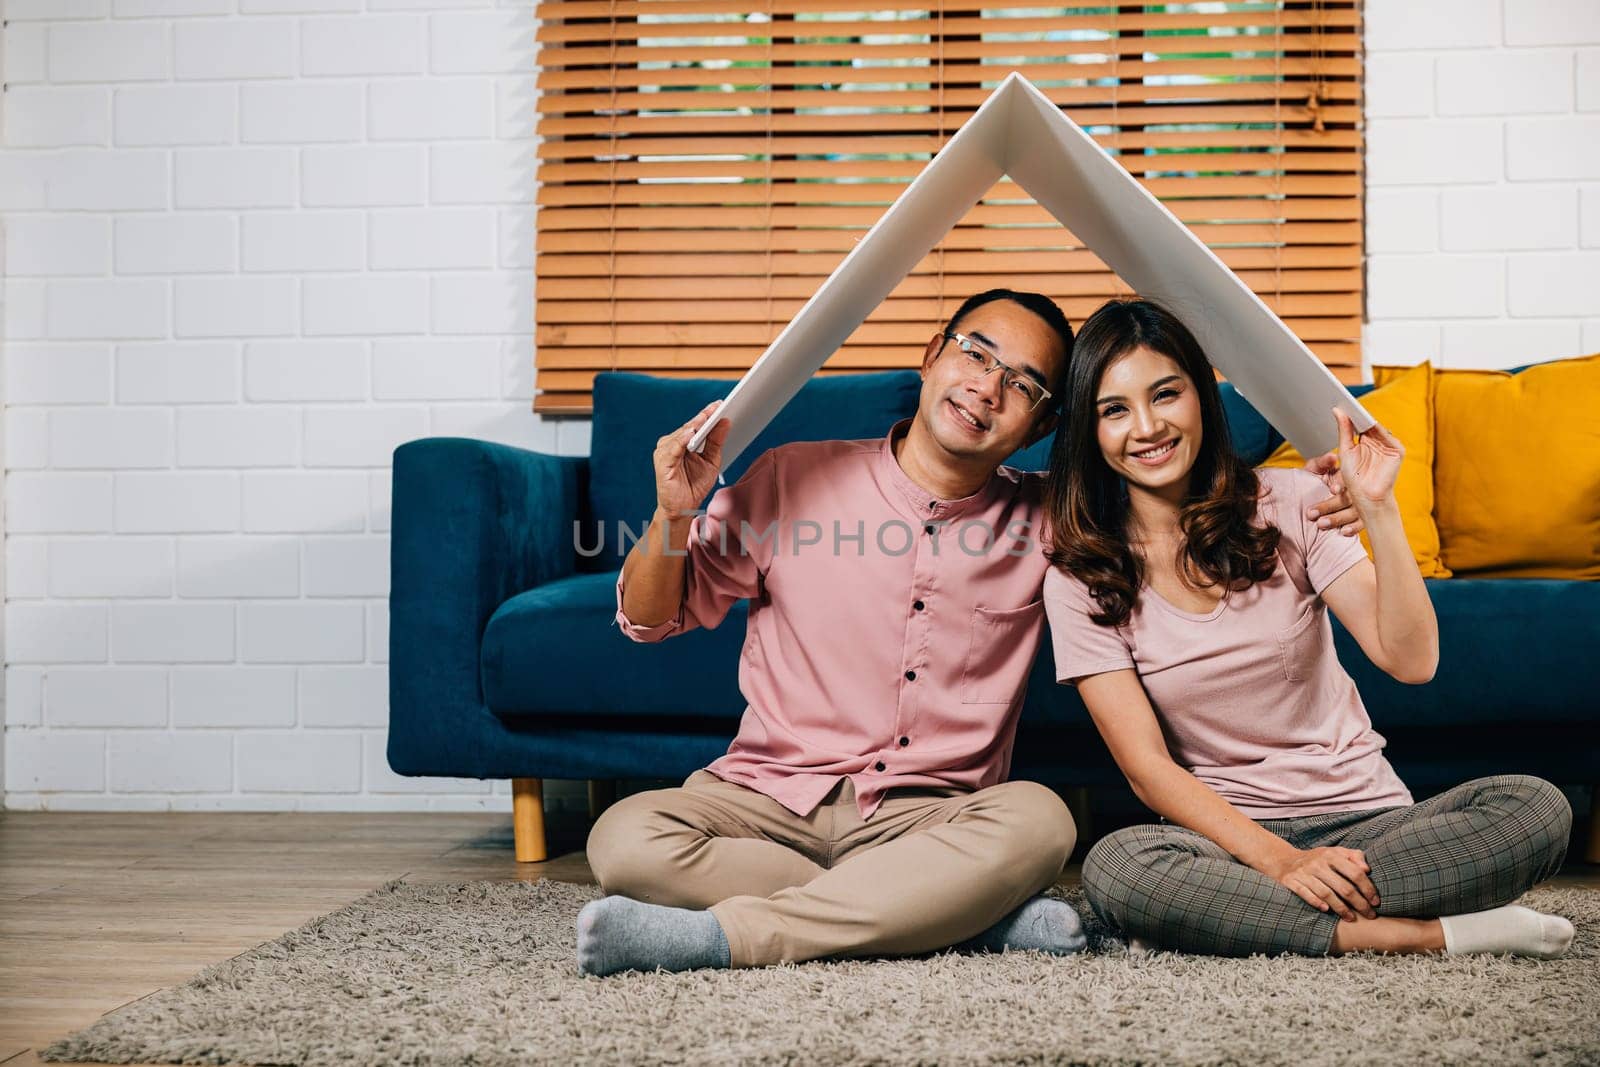 In their new home a smiling Asian couple builds a cardboard house roof signifying happiness and security. Full-length portrait against a white studio wall celebrating achievement and family bonding.